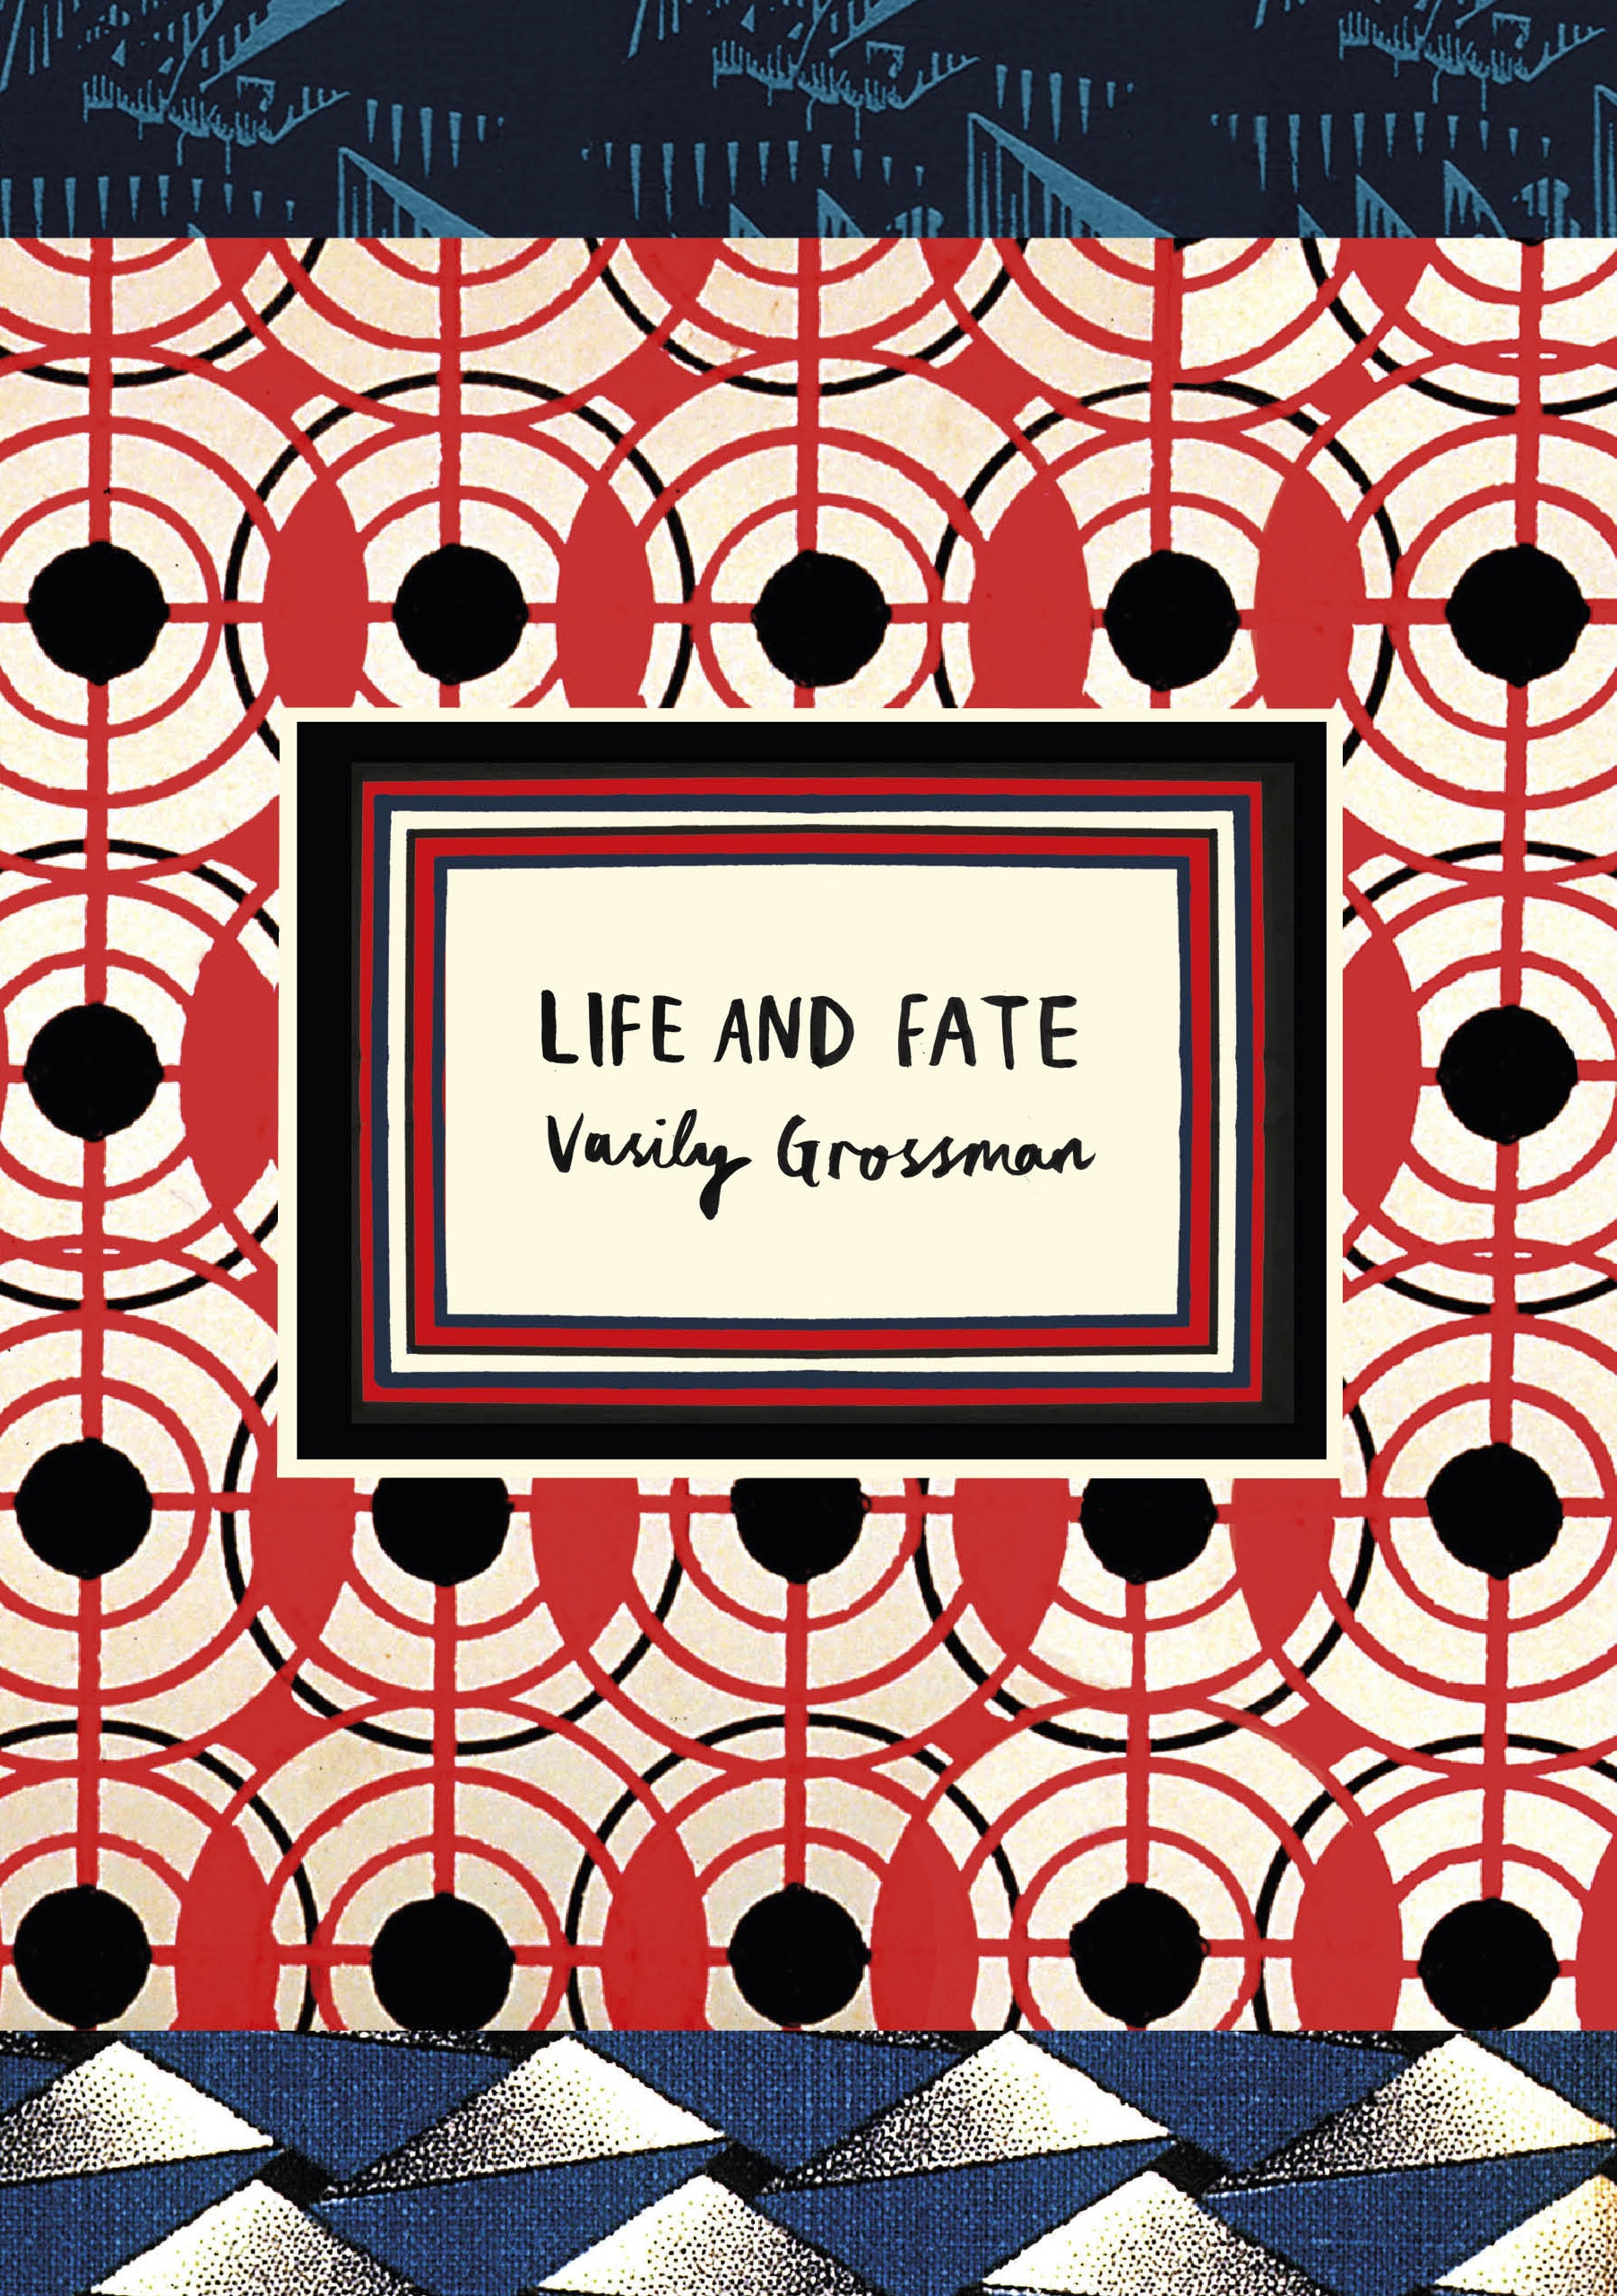 Book “Life and Fate (Vintage Classic Russians Series)” by Vasily Grossman — January 5, 2017